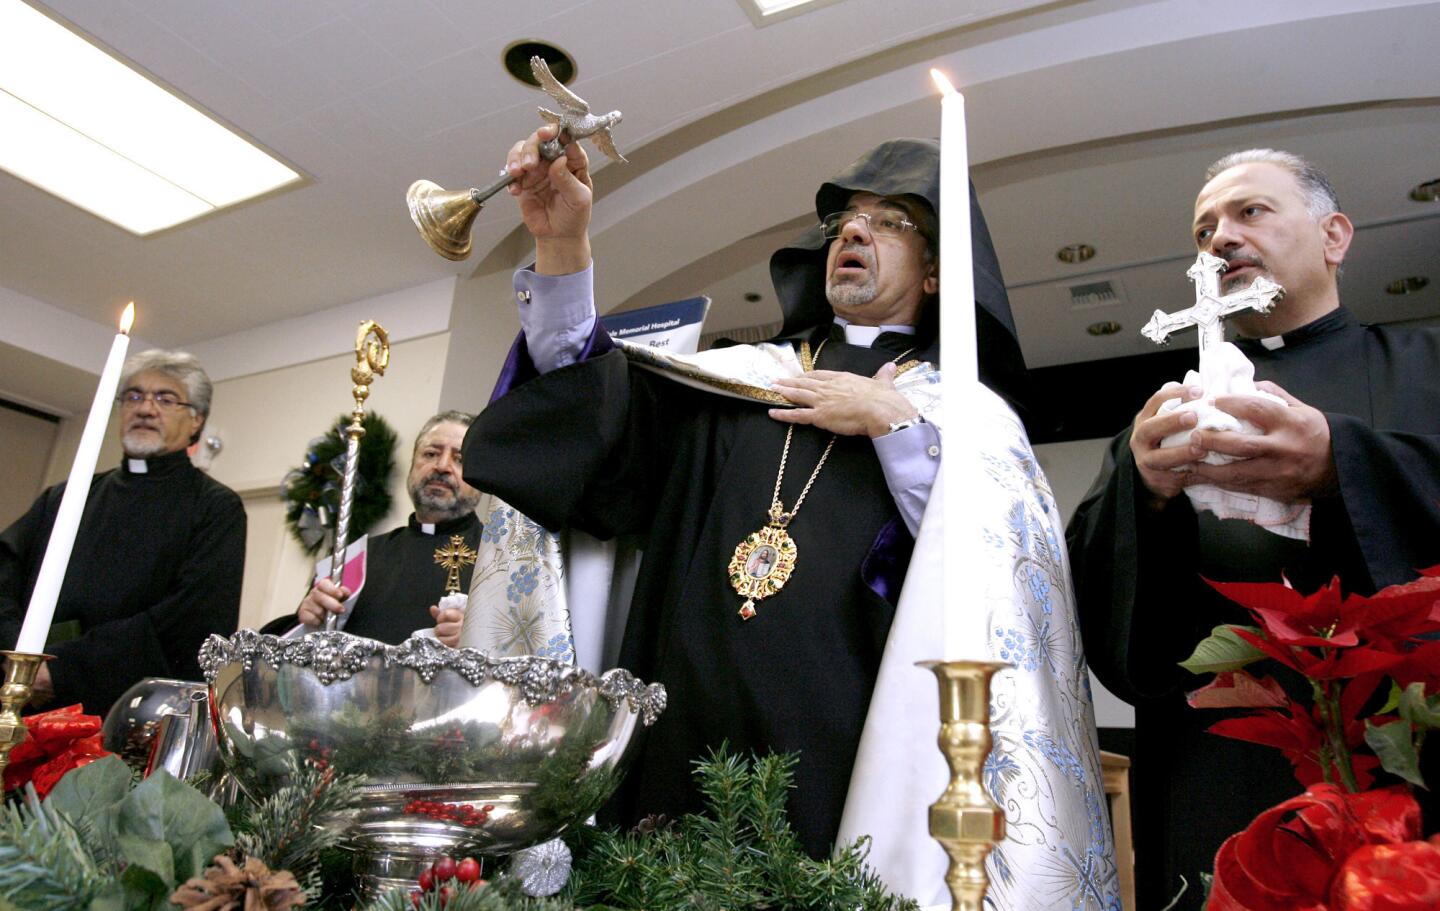 His Eminence Archbishop Moushegh Mardirossian of the Armenian Apostolic Church presides over blessing of the water during Armenian Christmas celebration at Glendale Memorial Hospital in Glendale on Thursday, January 5, 2011.